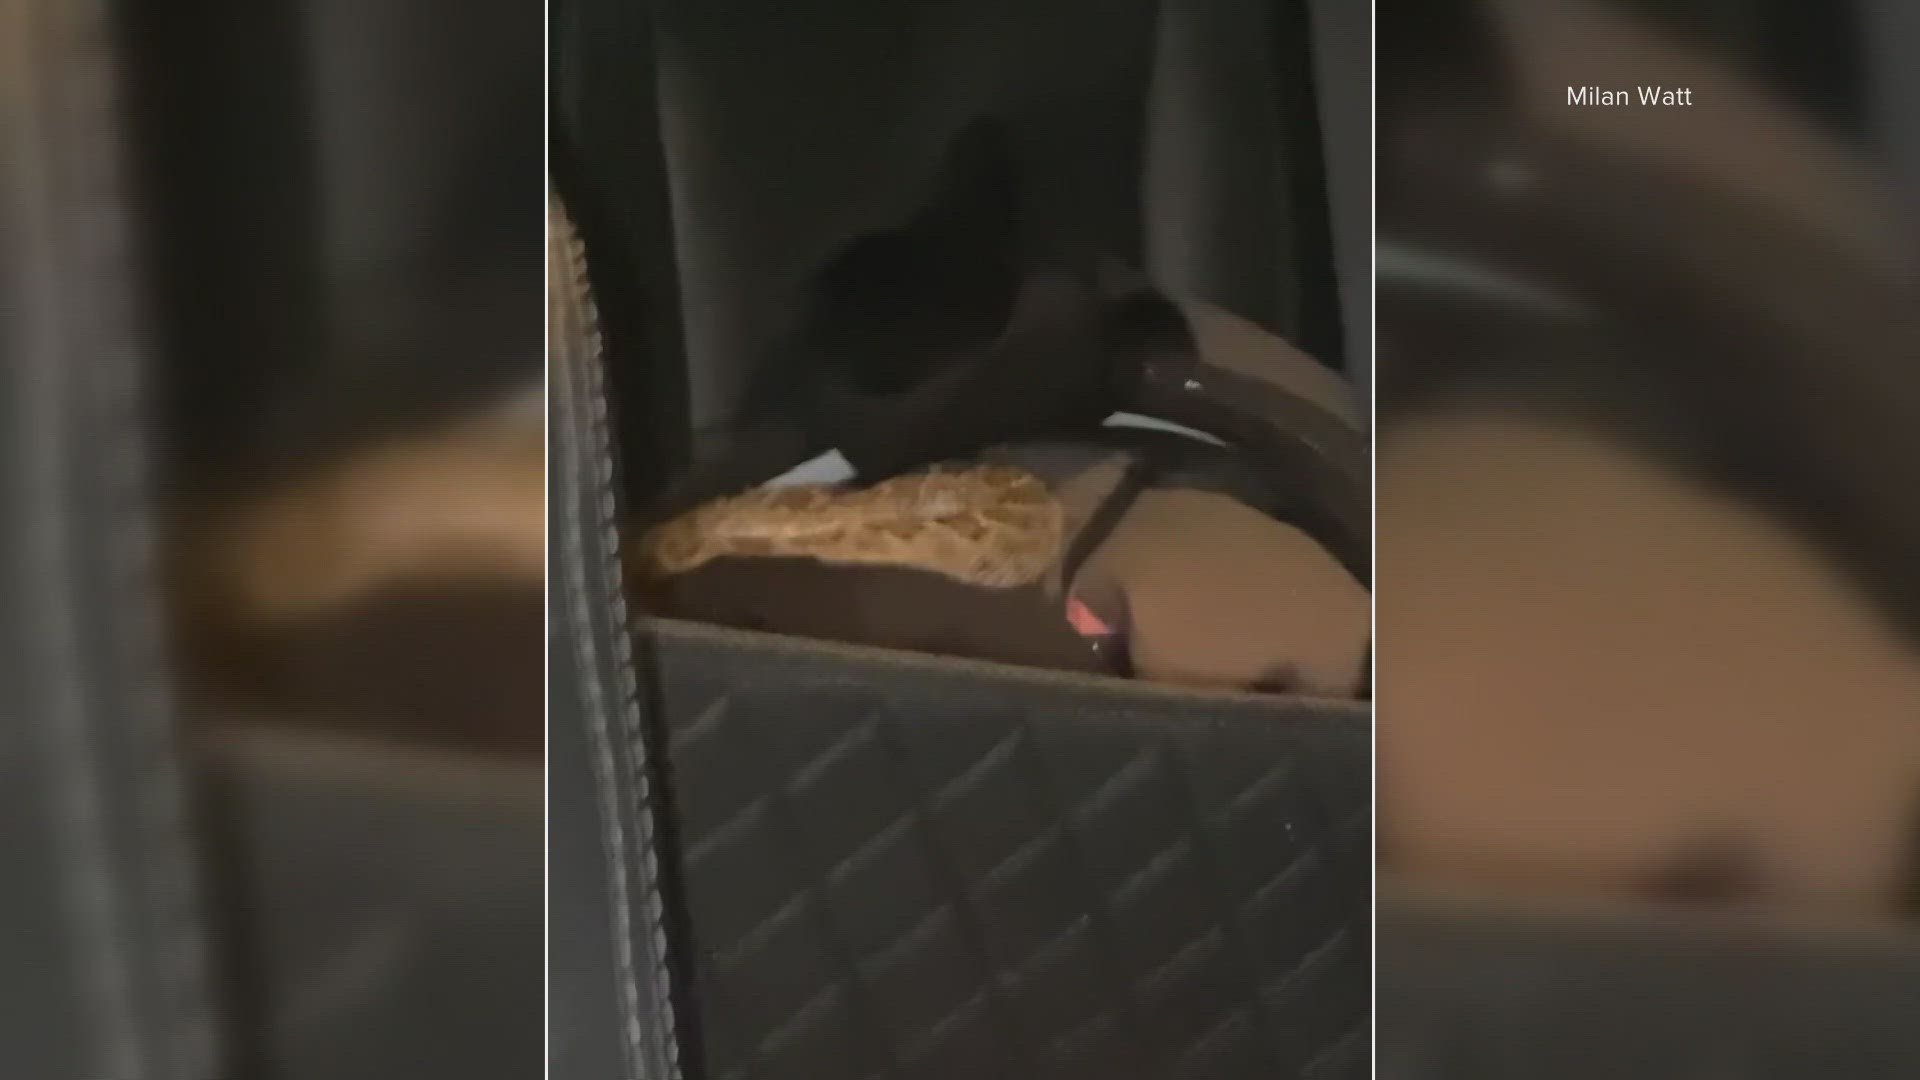 Milan Watt said the snake was likely in her backseat for two weeks.